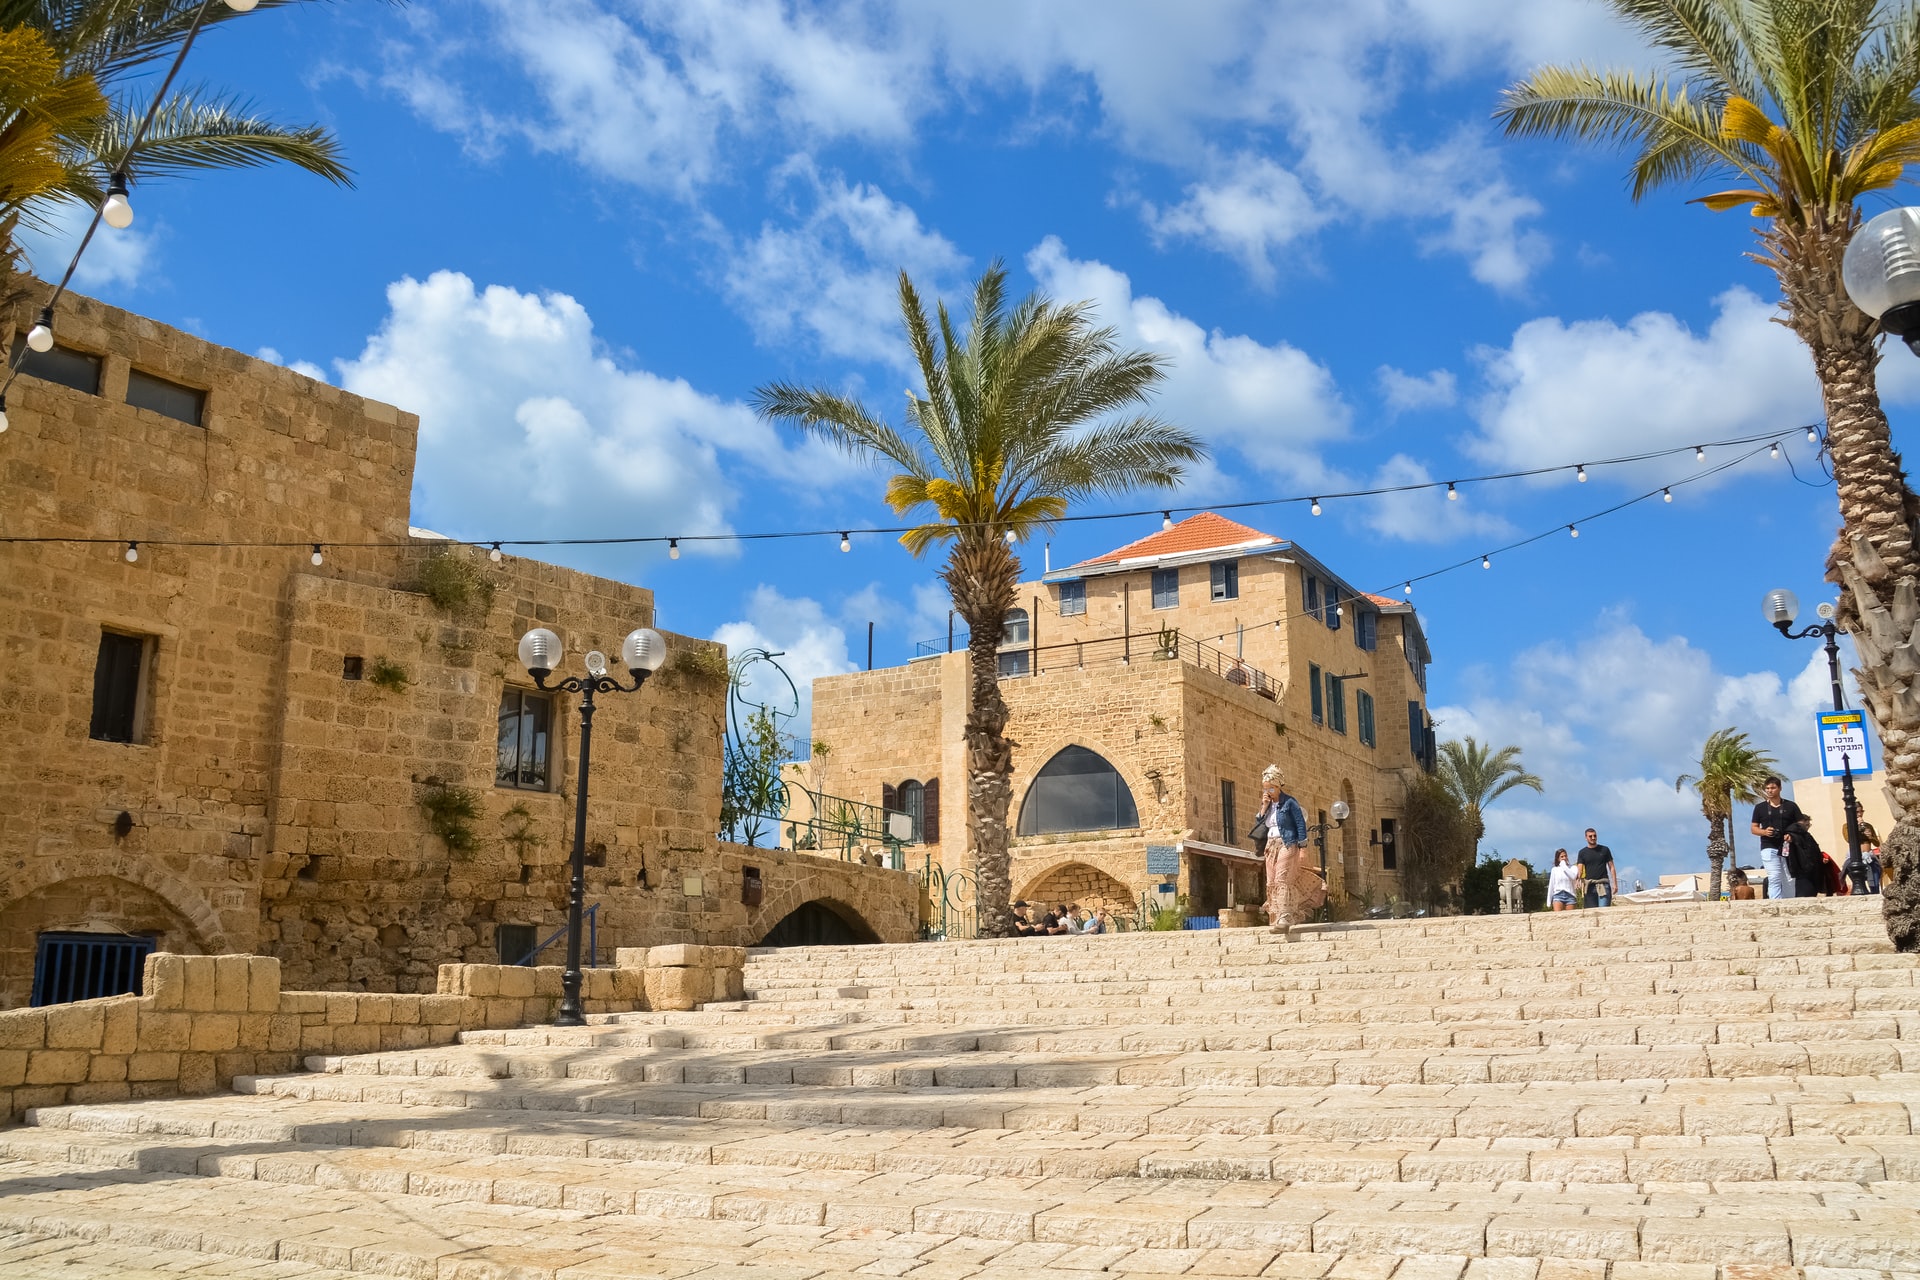 The stairs lead to Kedumim Square and St Peter's church in Jaffa